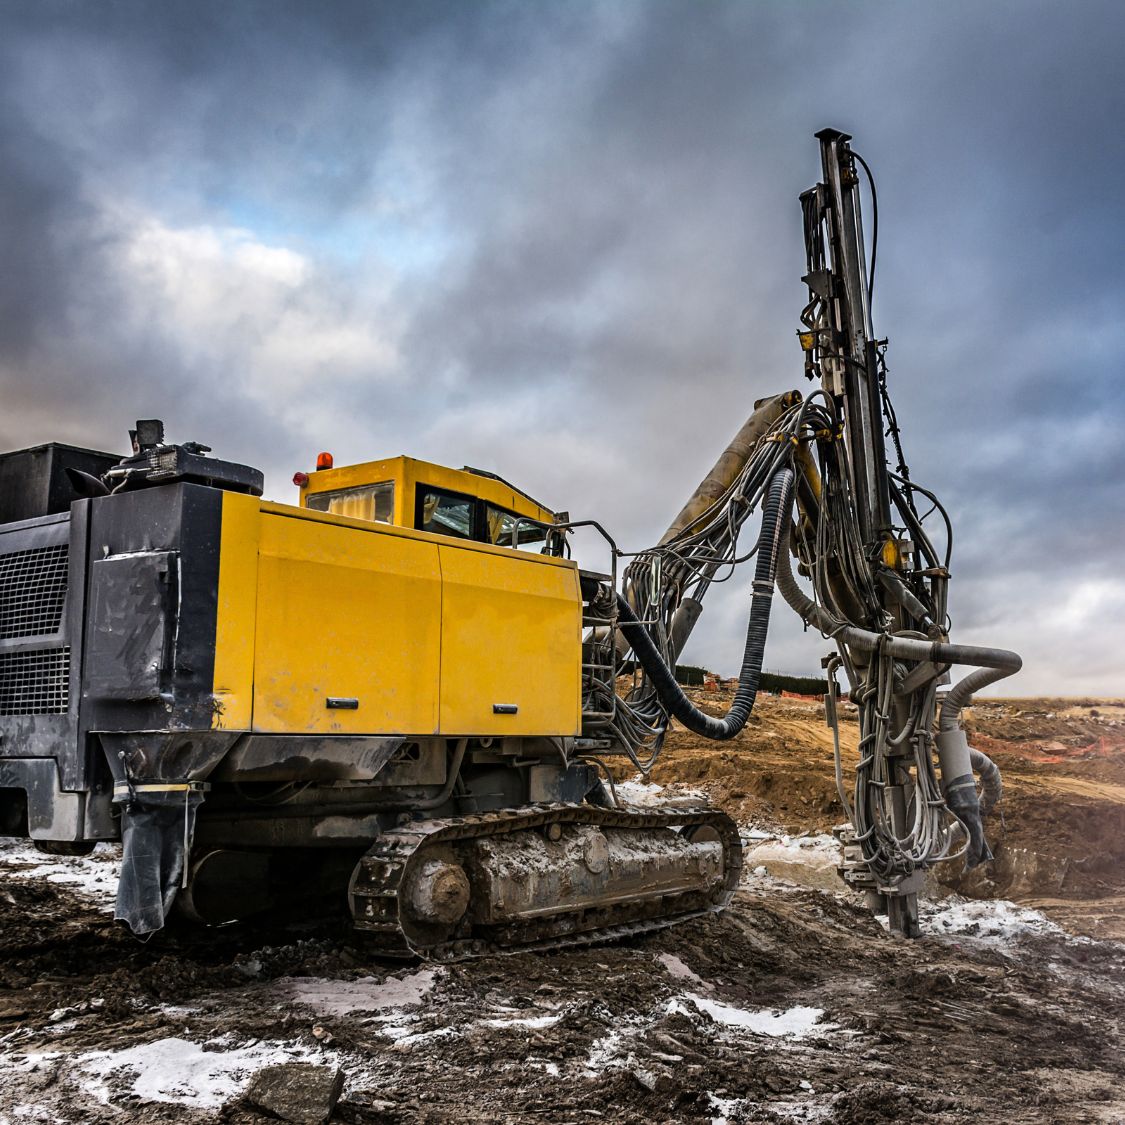 Questions To Ask When Renting Heavy Construction Equipment